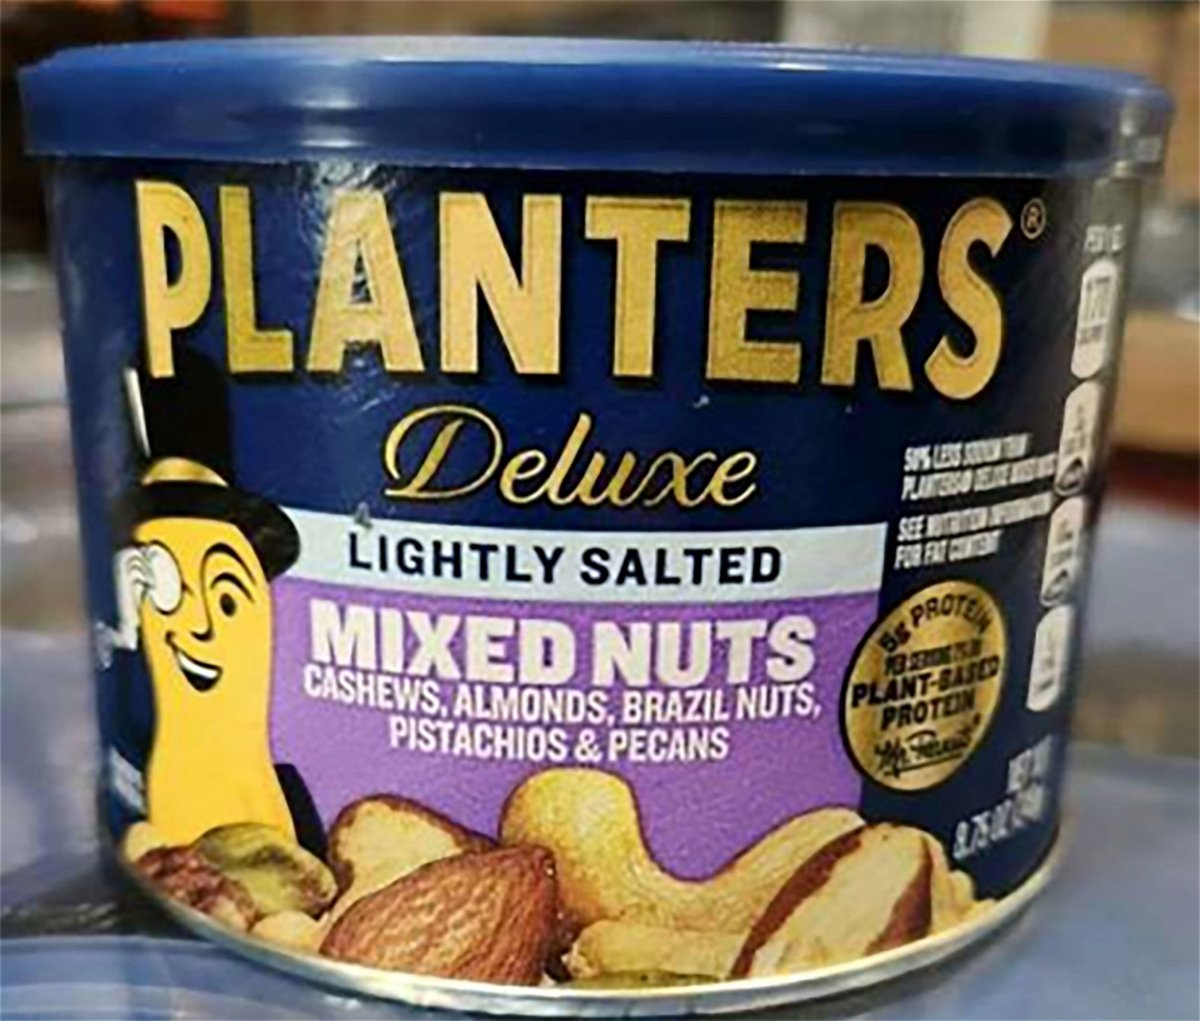 Two Planters nut products have been recalled due to possible contamination with the bacteria that causes listeria.